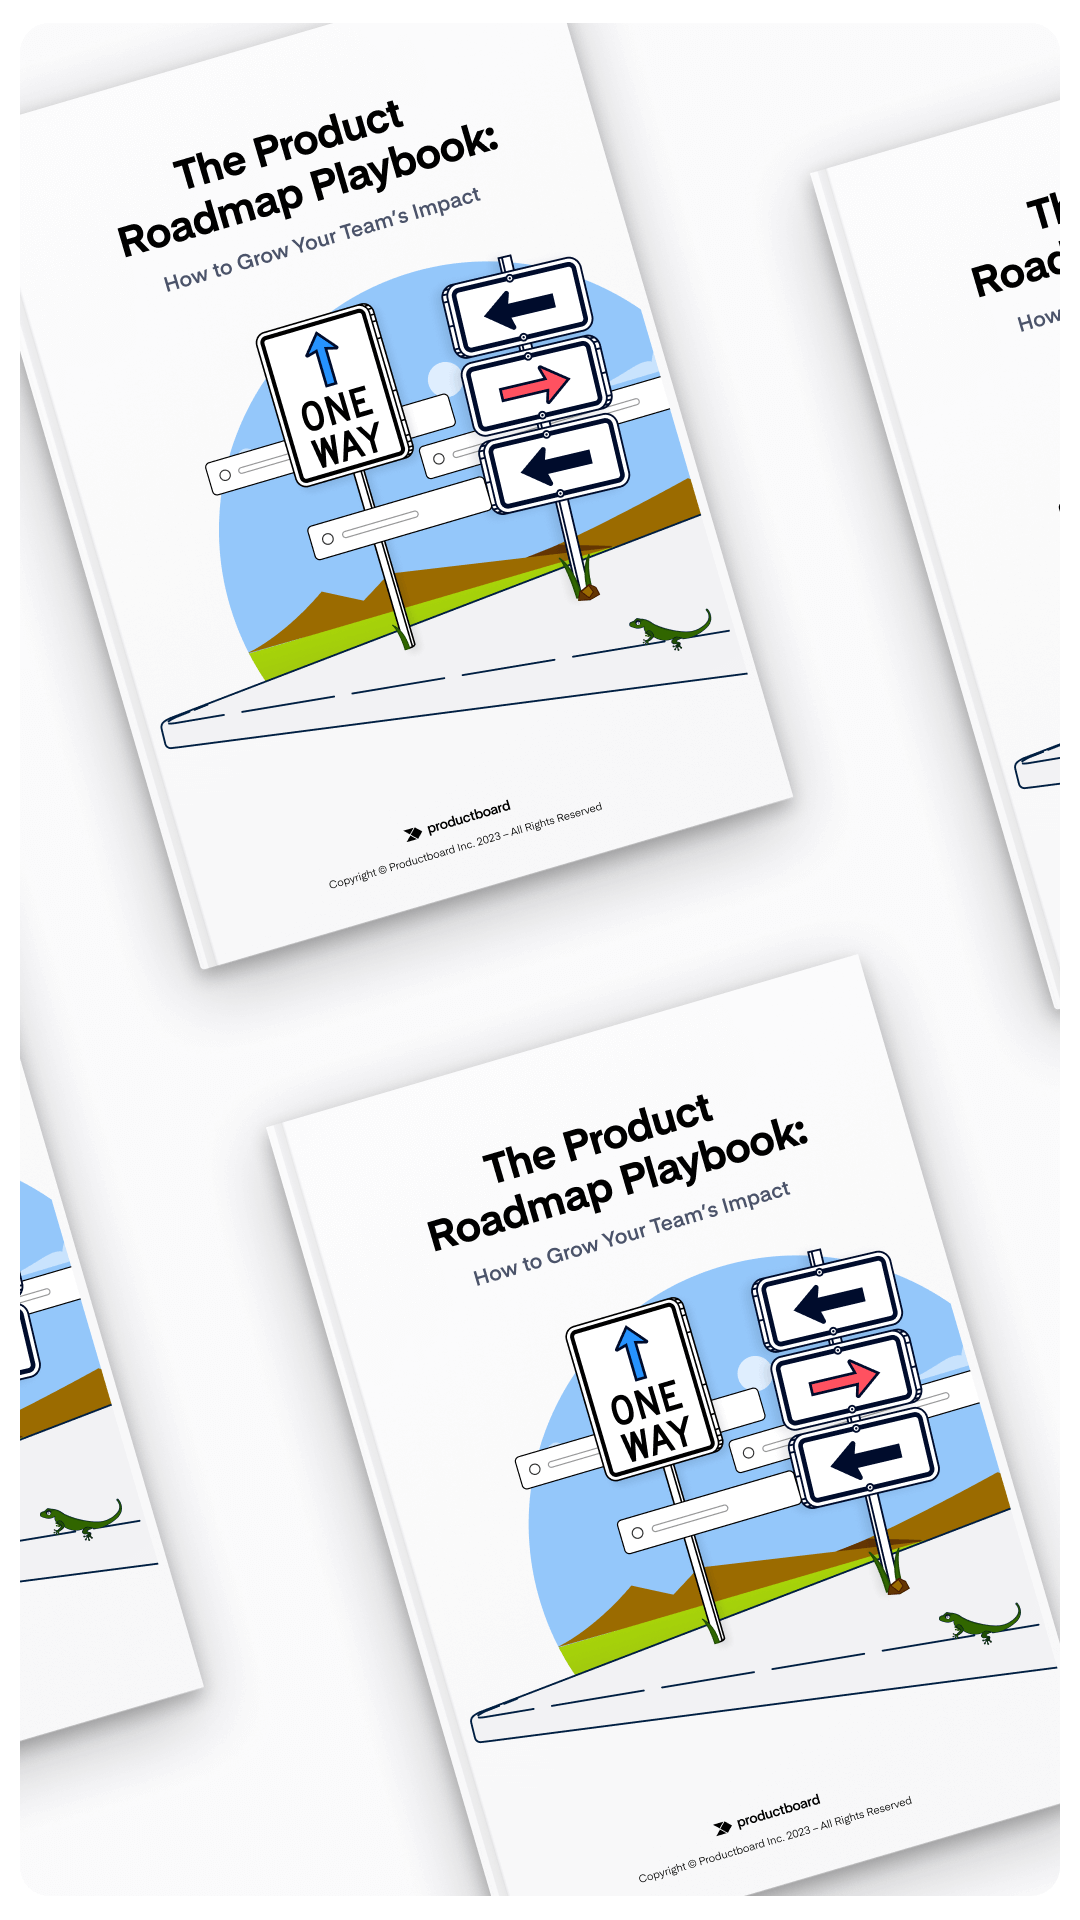 The Product Roadmap Playbook